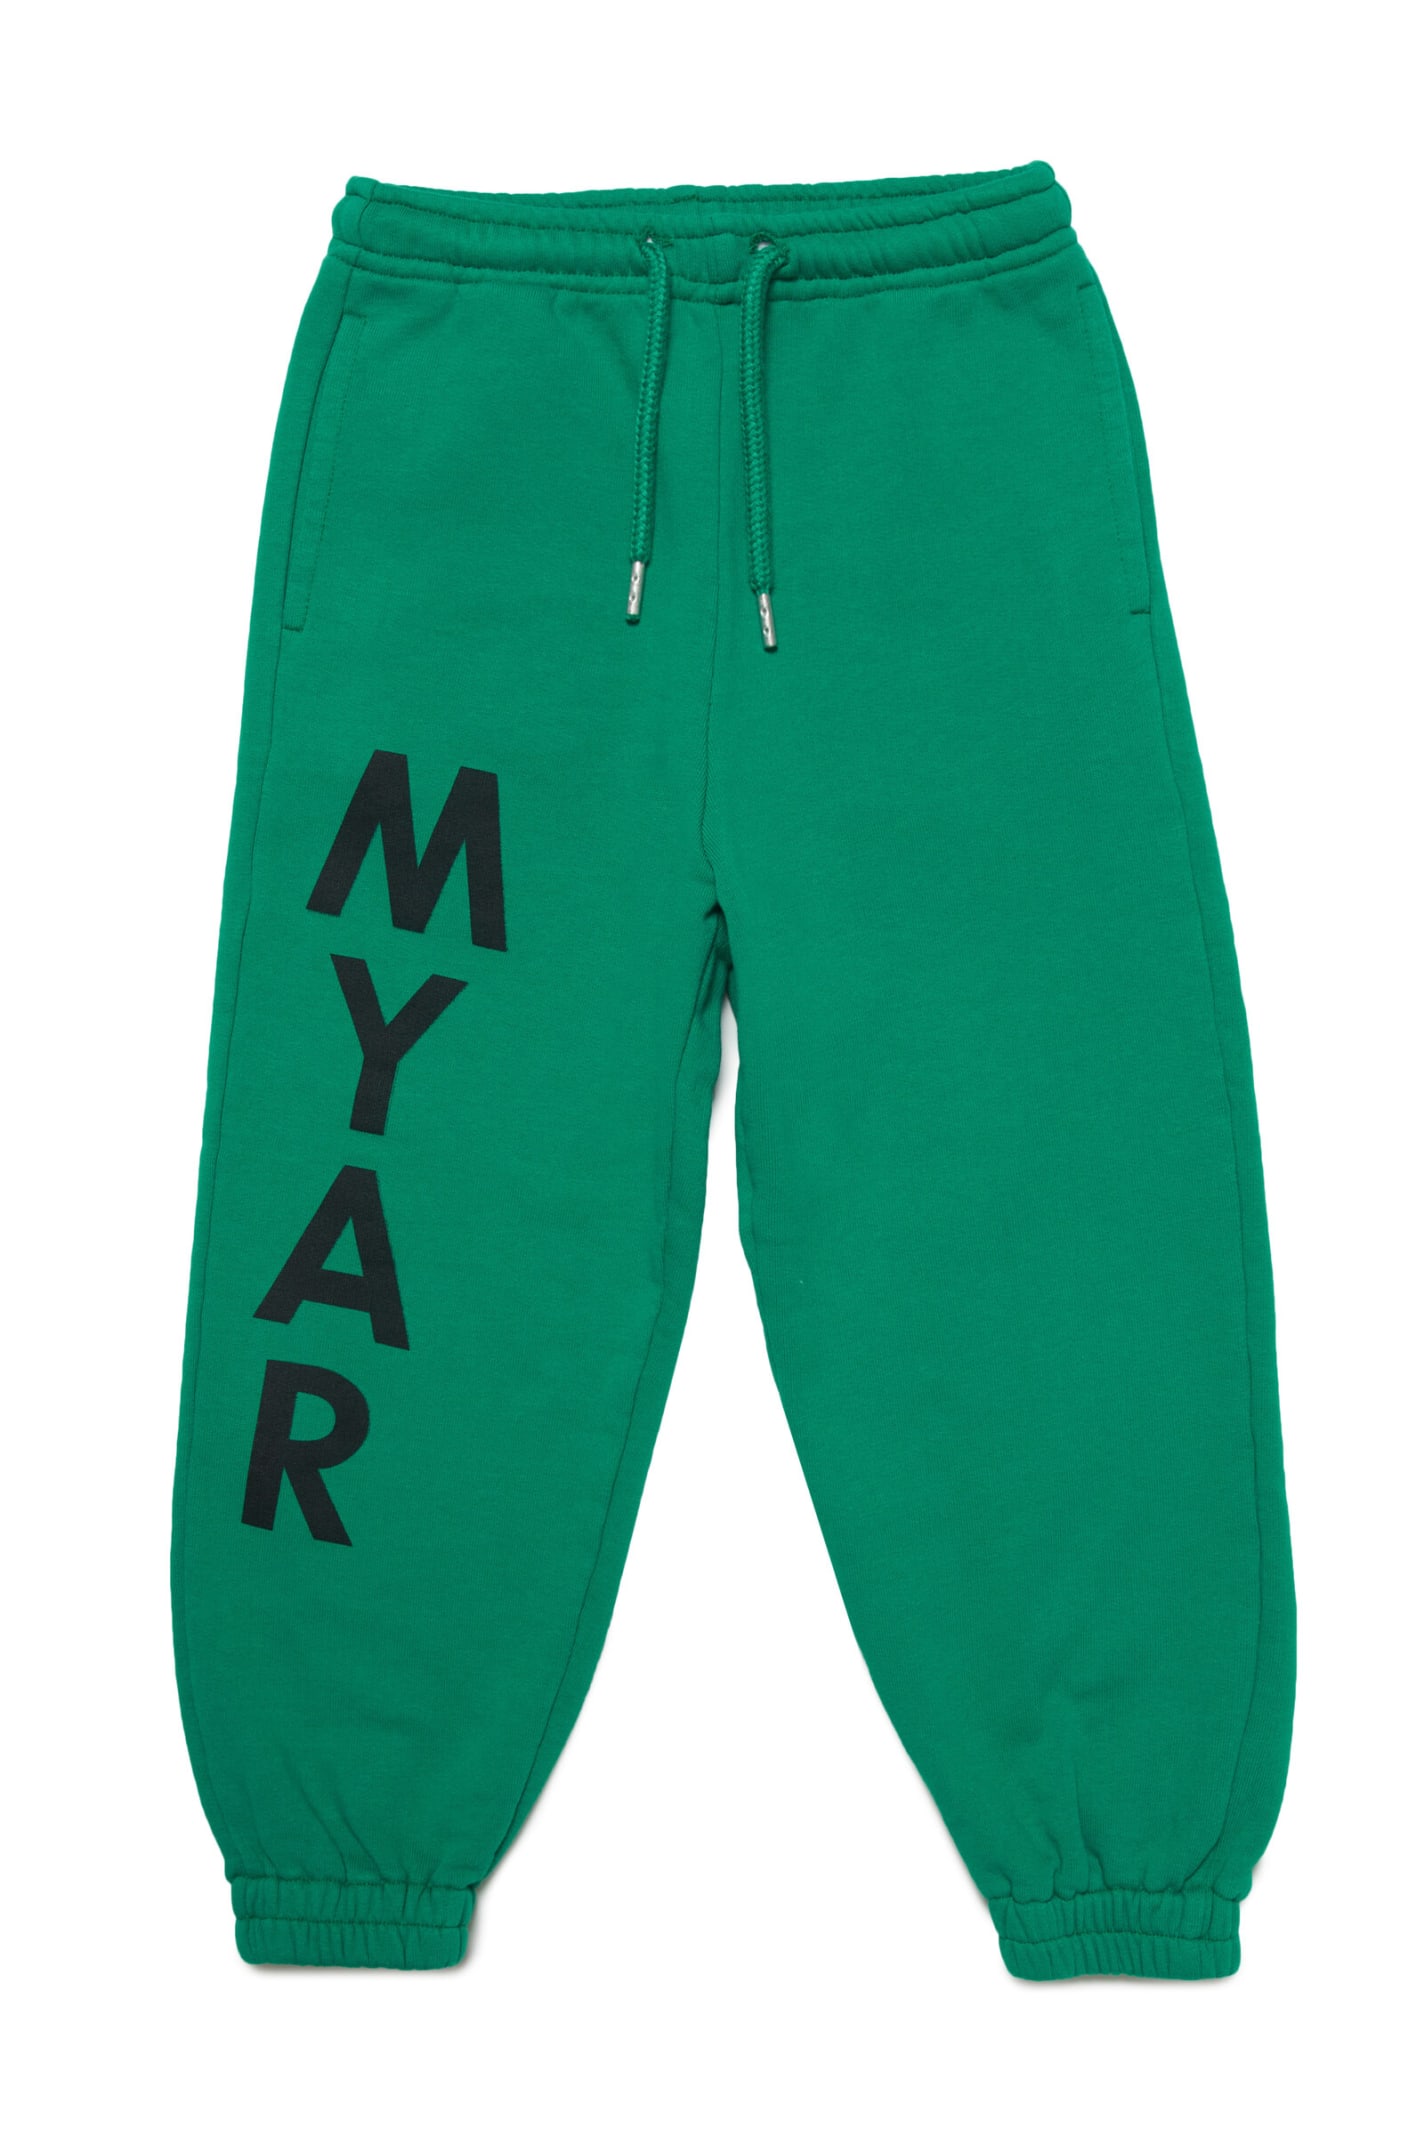 MYAR MYP5U TROUSERS MYAR DEADSTOCK GREEN PLUSH JOGGER TROUSERS WITH VERTICAL LOGO